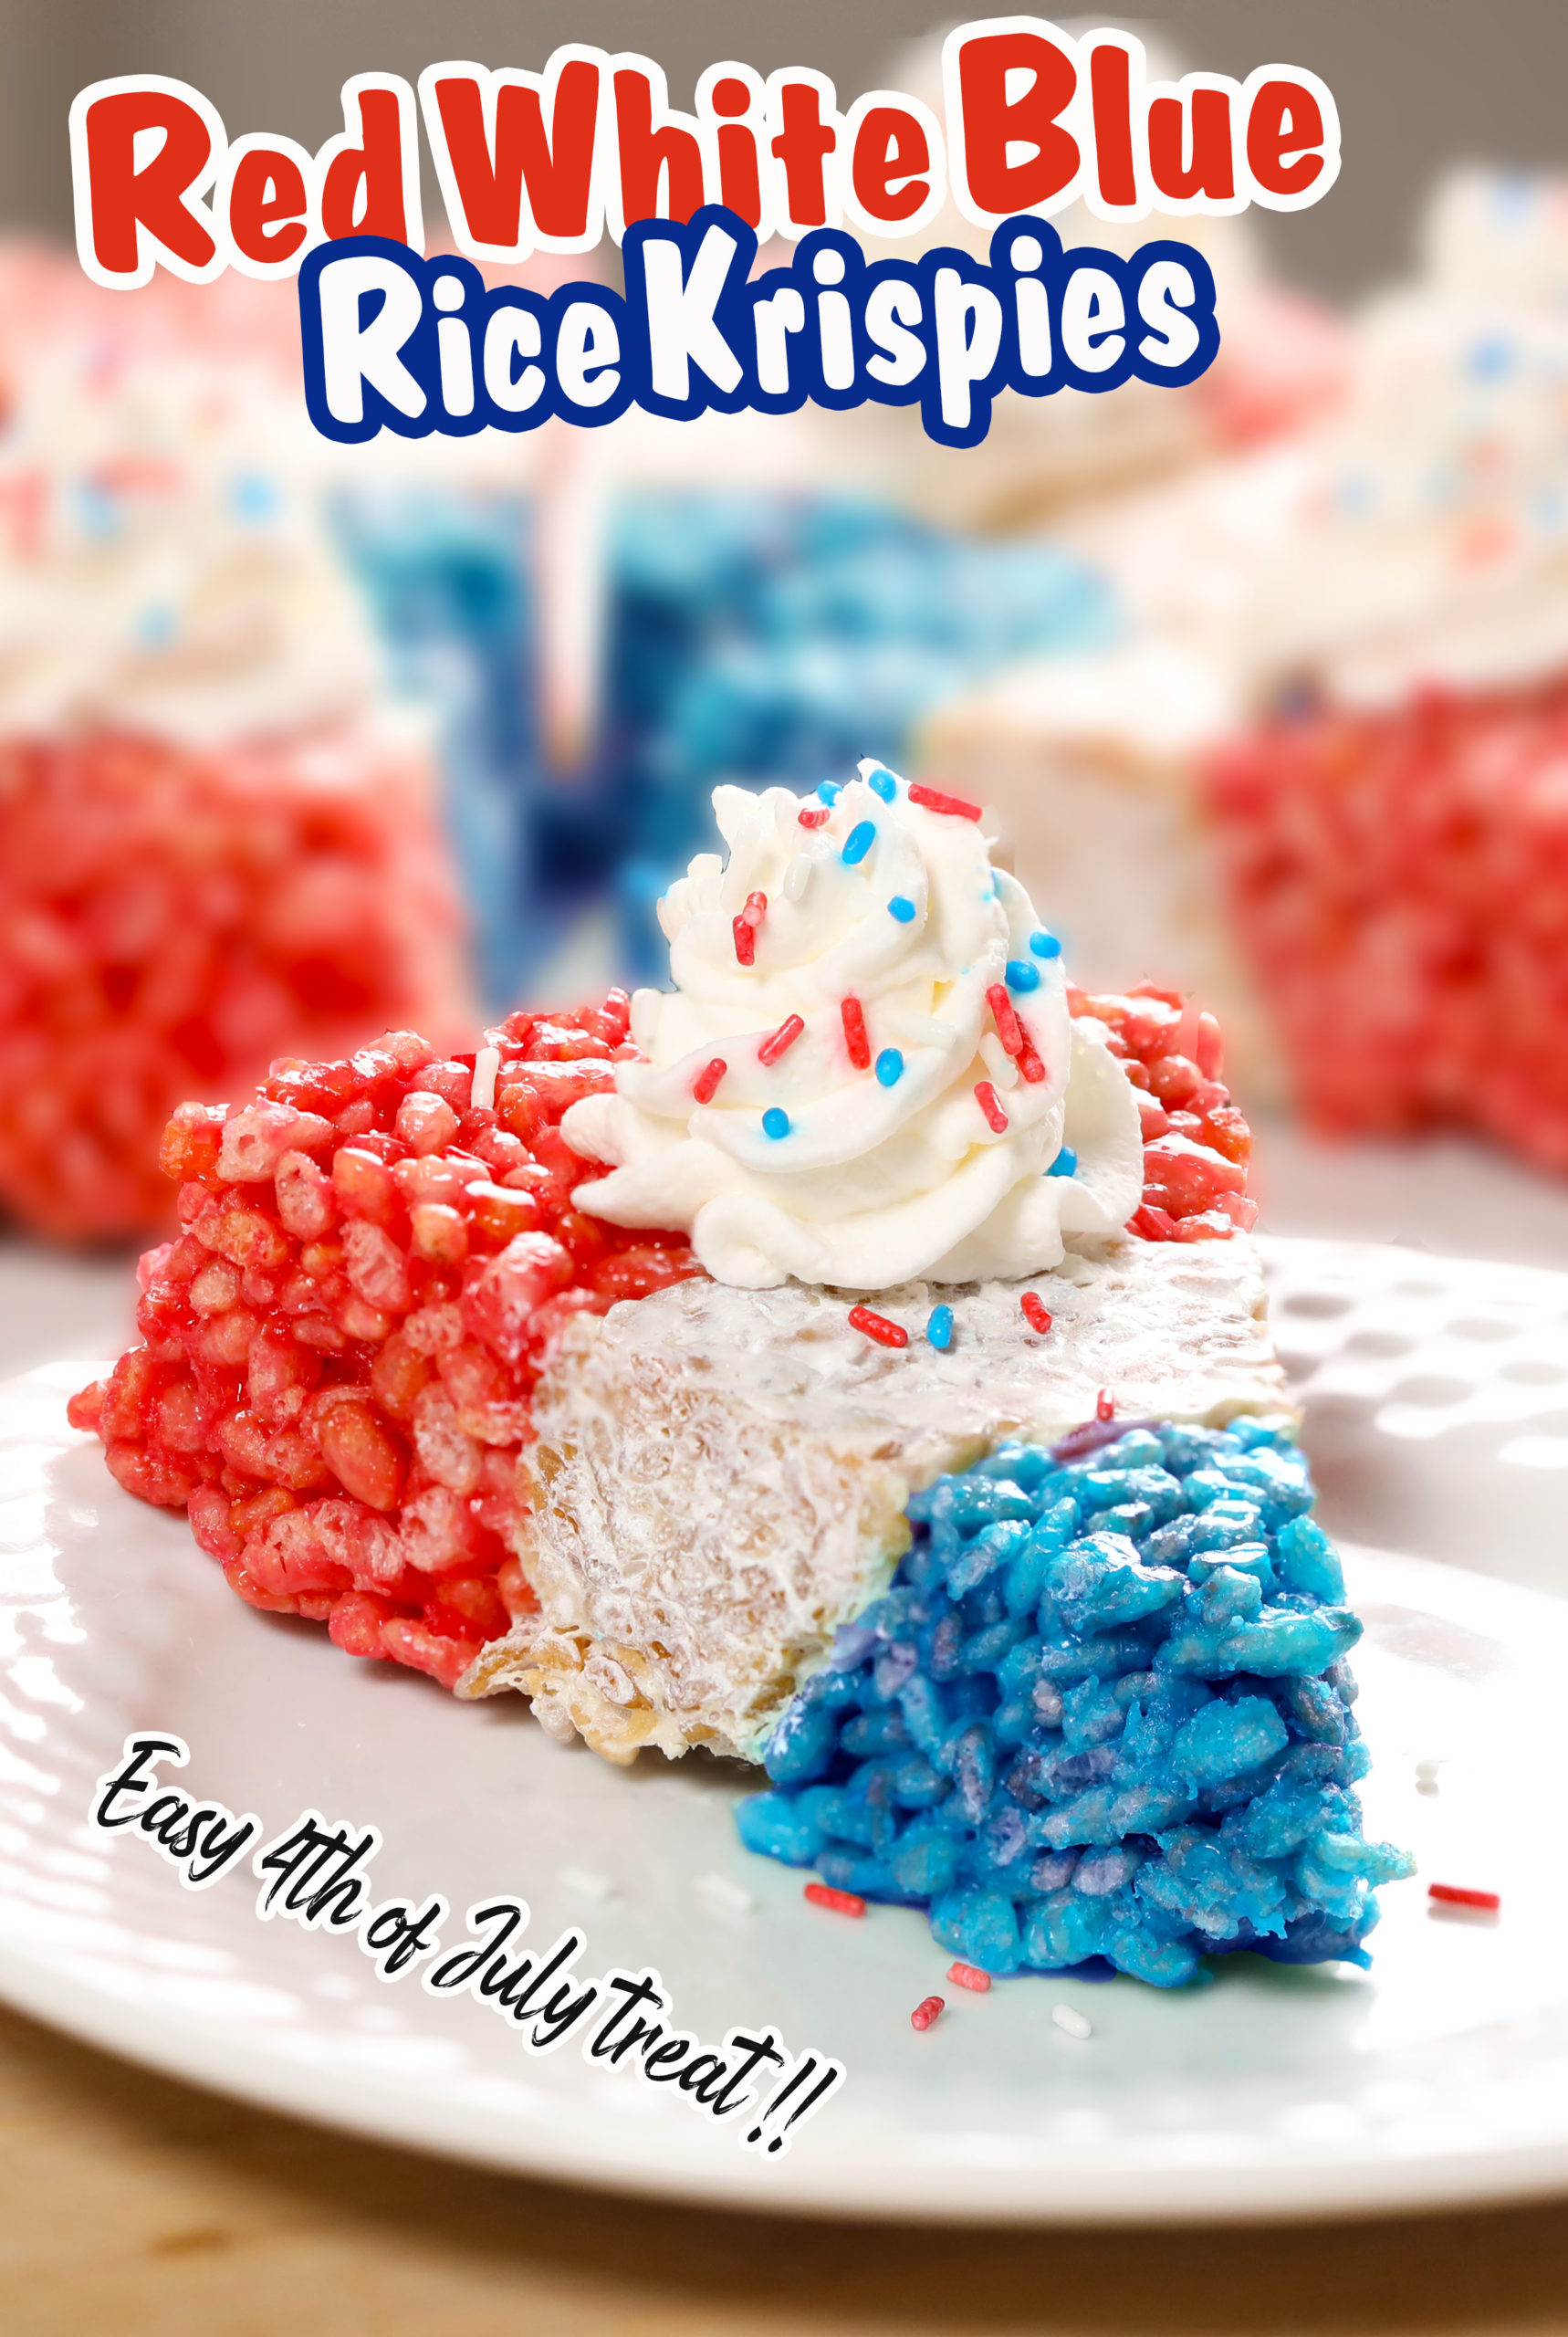 Delicious and Easy to make Red, White, and Blue Rice Krispie Treats Are Always A Hit, And Festive For the 4th of July or Memorial Day, or any Patriotic Occasion.